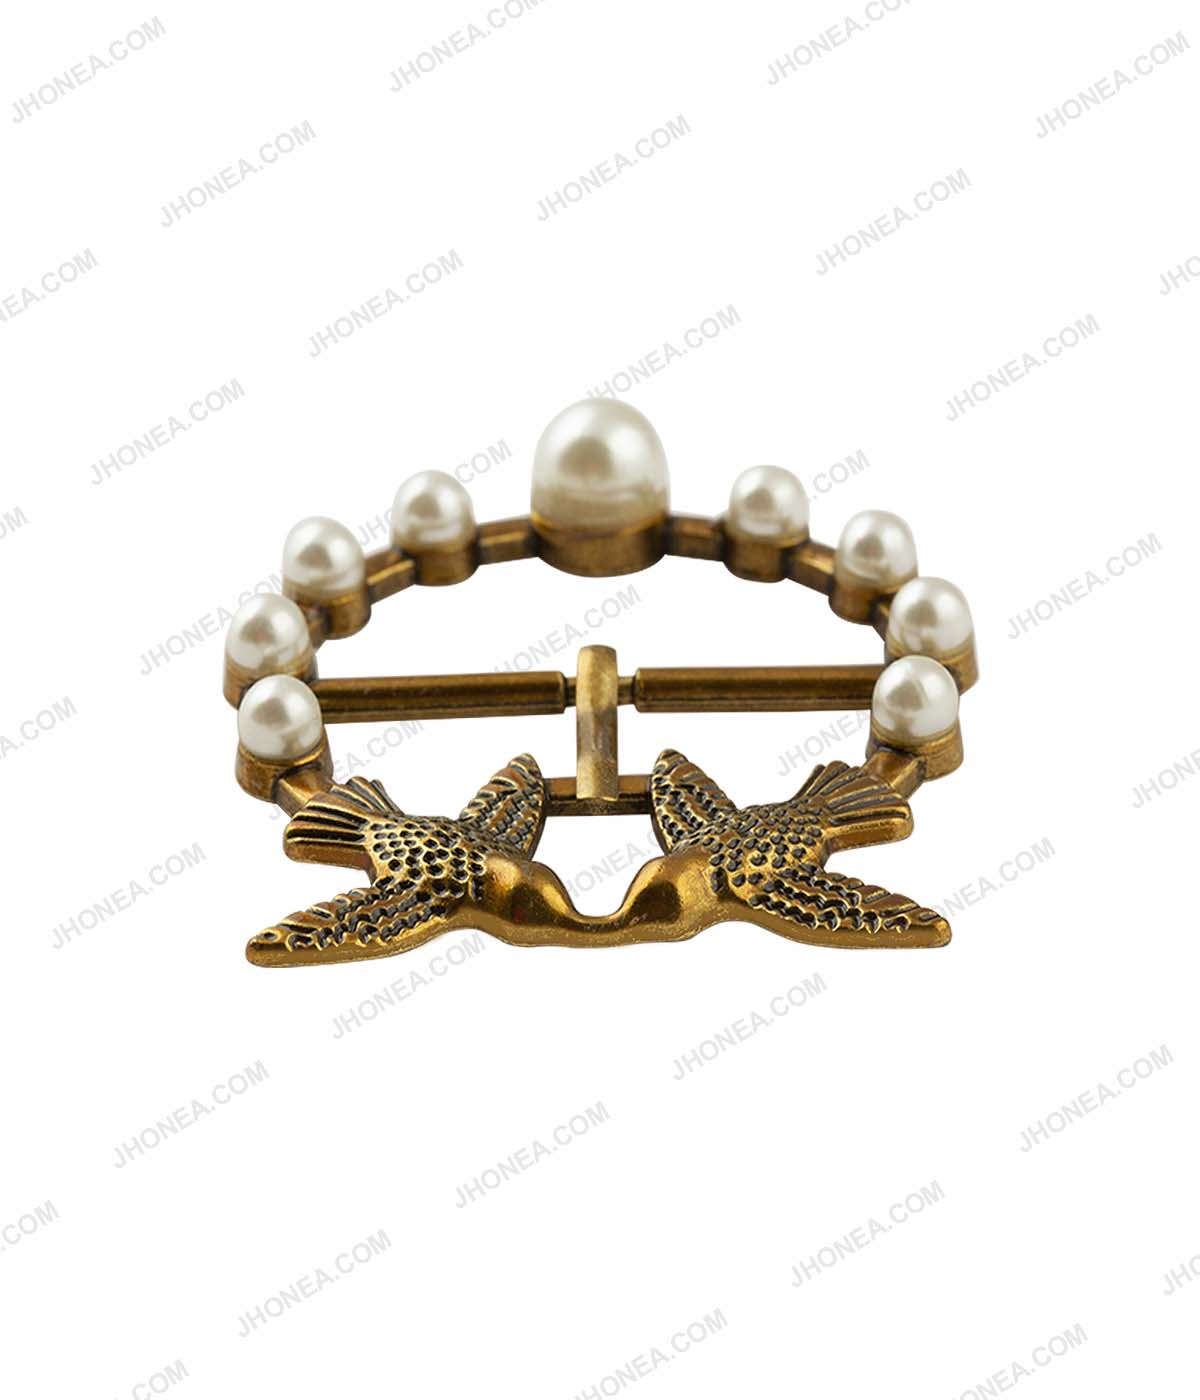 Authentic Vintage Bird Design Prong Belt Buckle with Pearls Accent